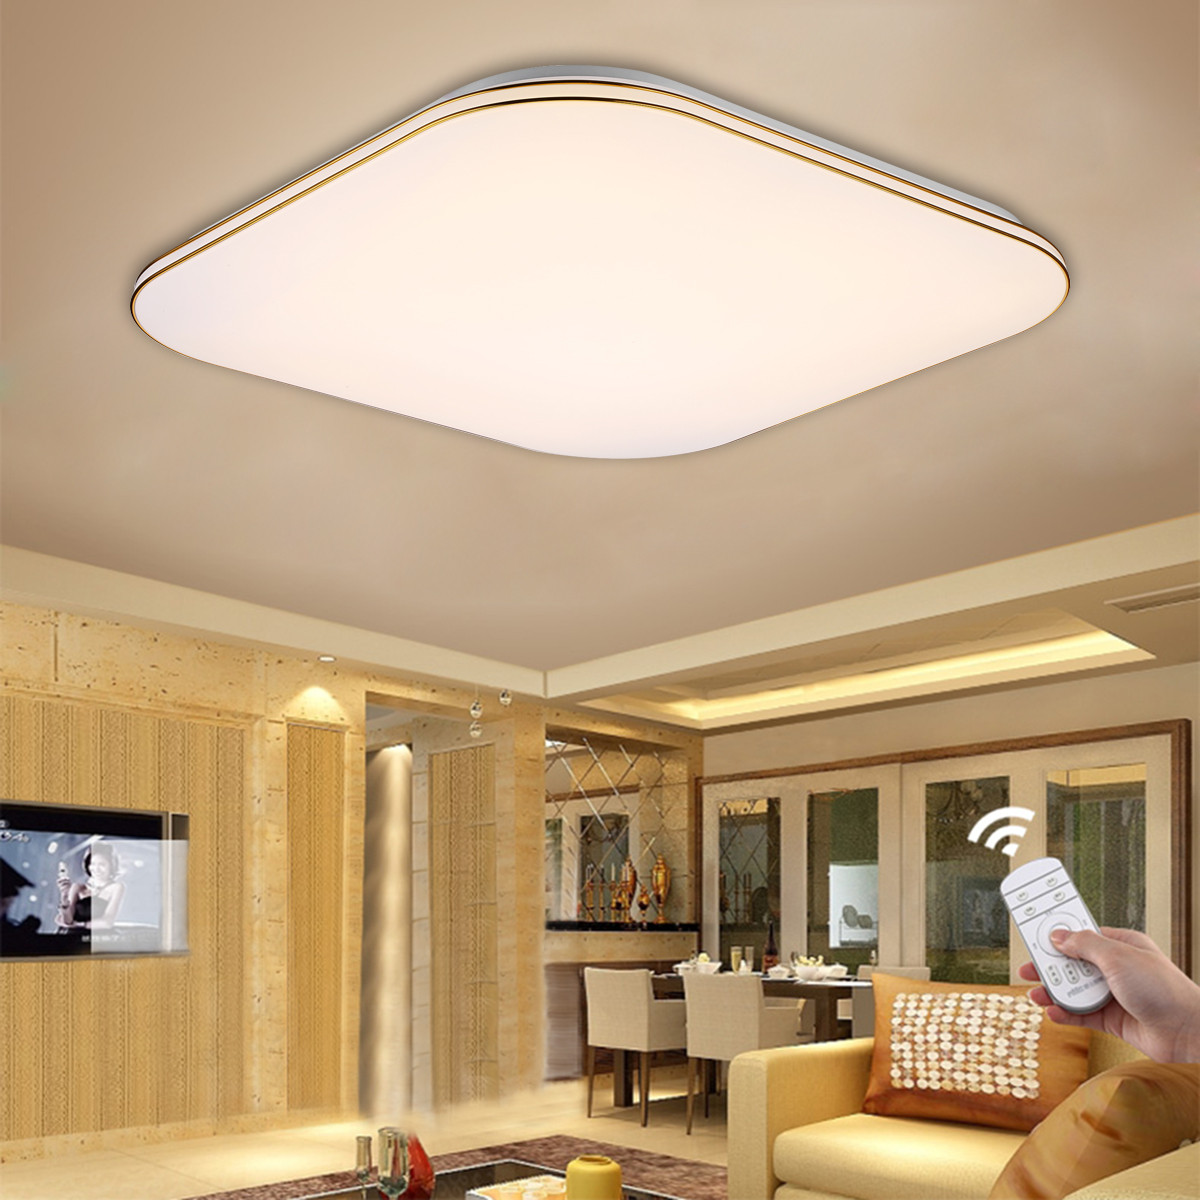 Bright Kitchen Ceiling Lights
 Details about Bright 36W LED Ceiling Down Light Flush